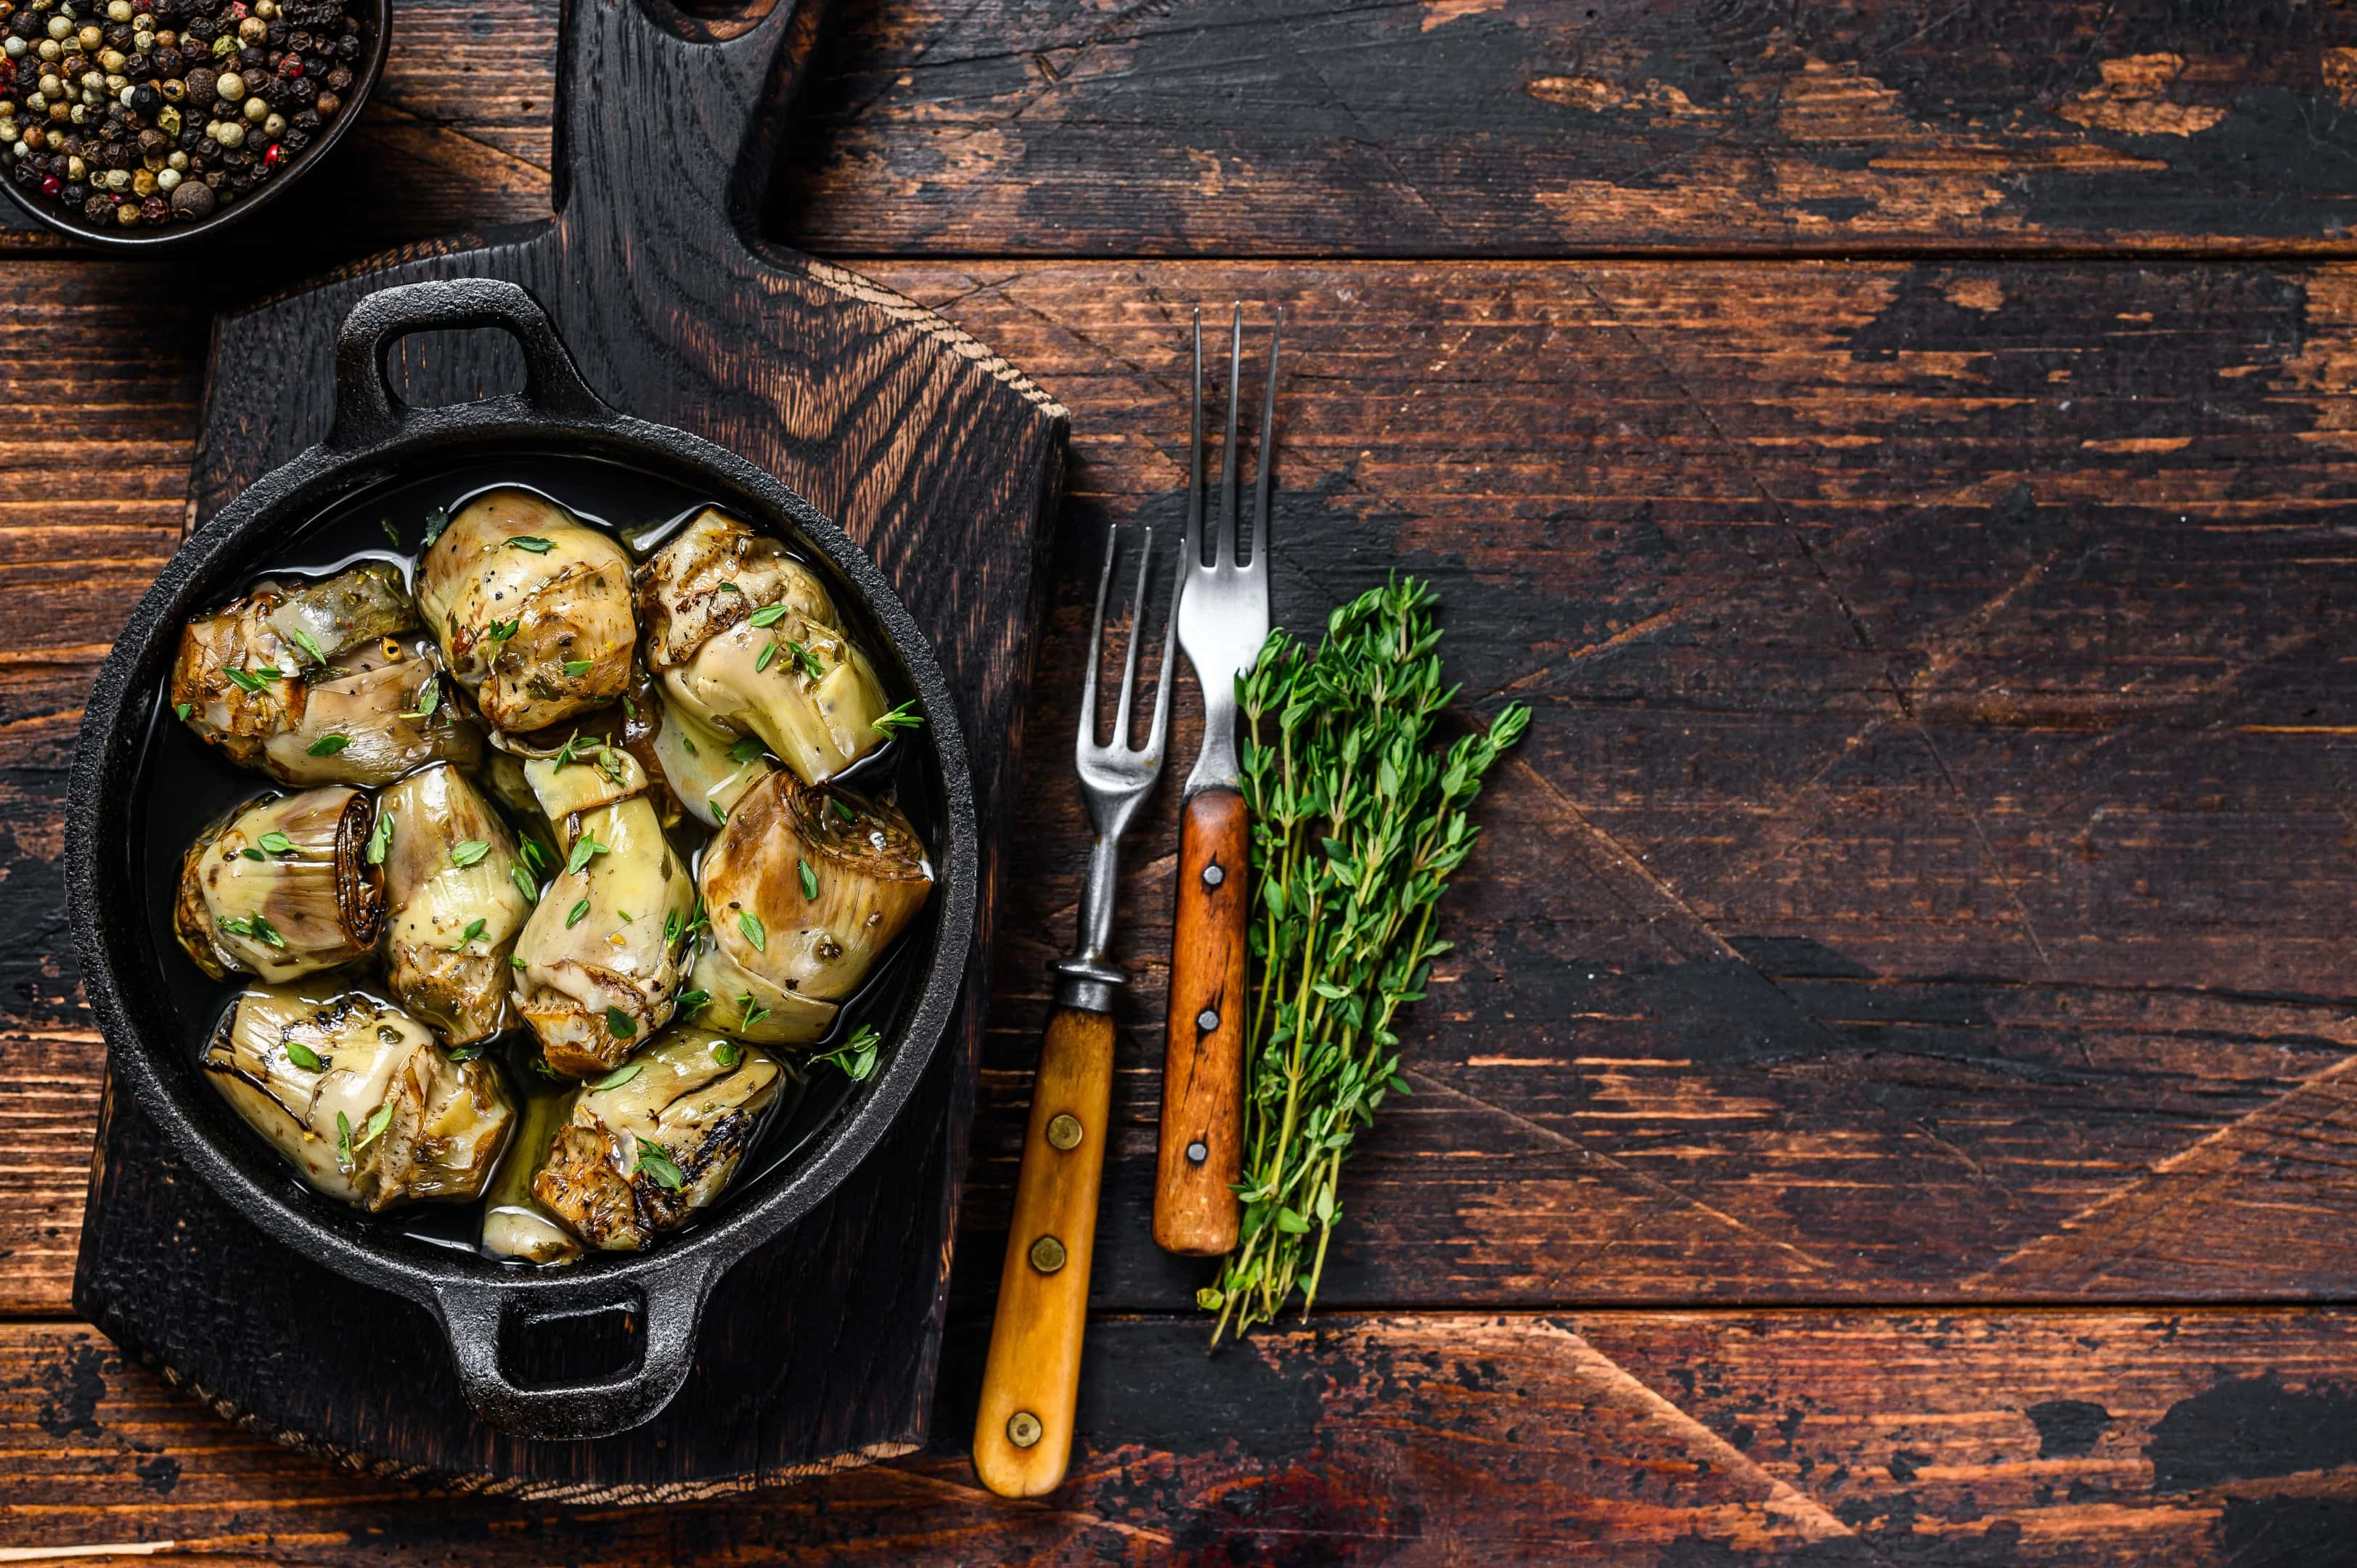 Artichokes marinated with champagne vinegar in pan on wooden table